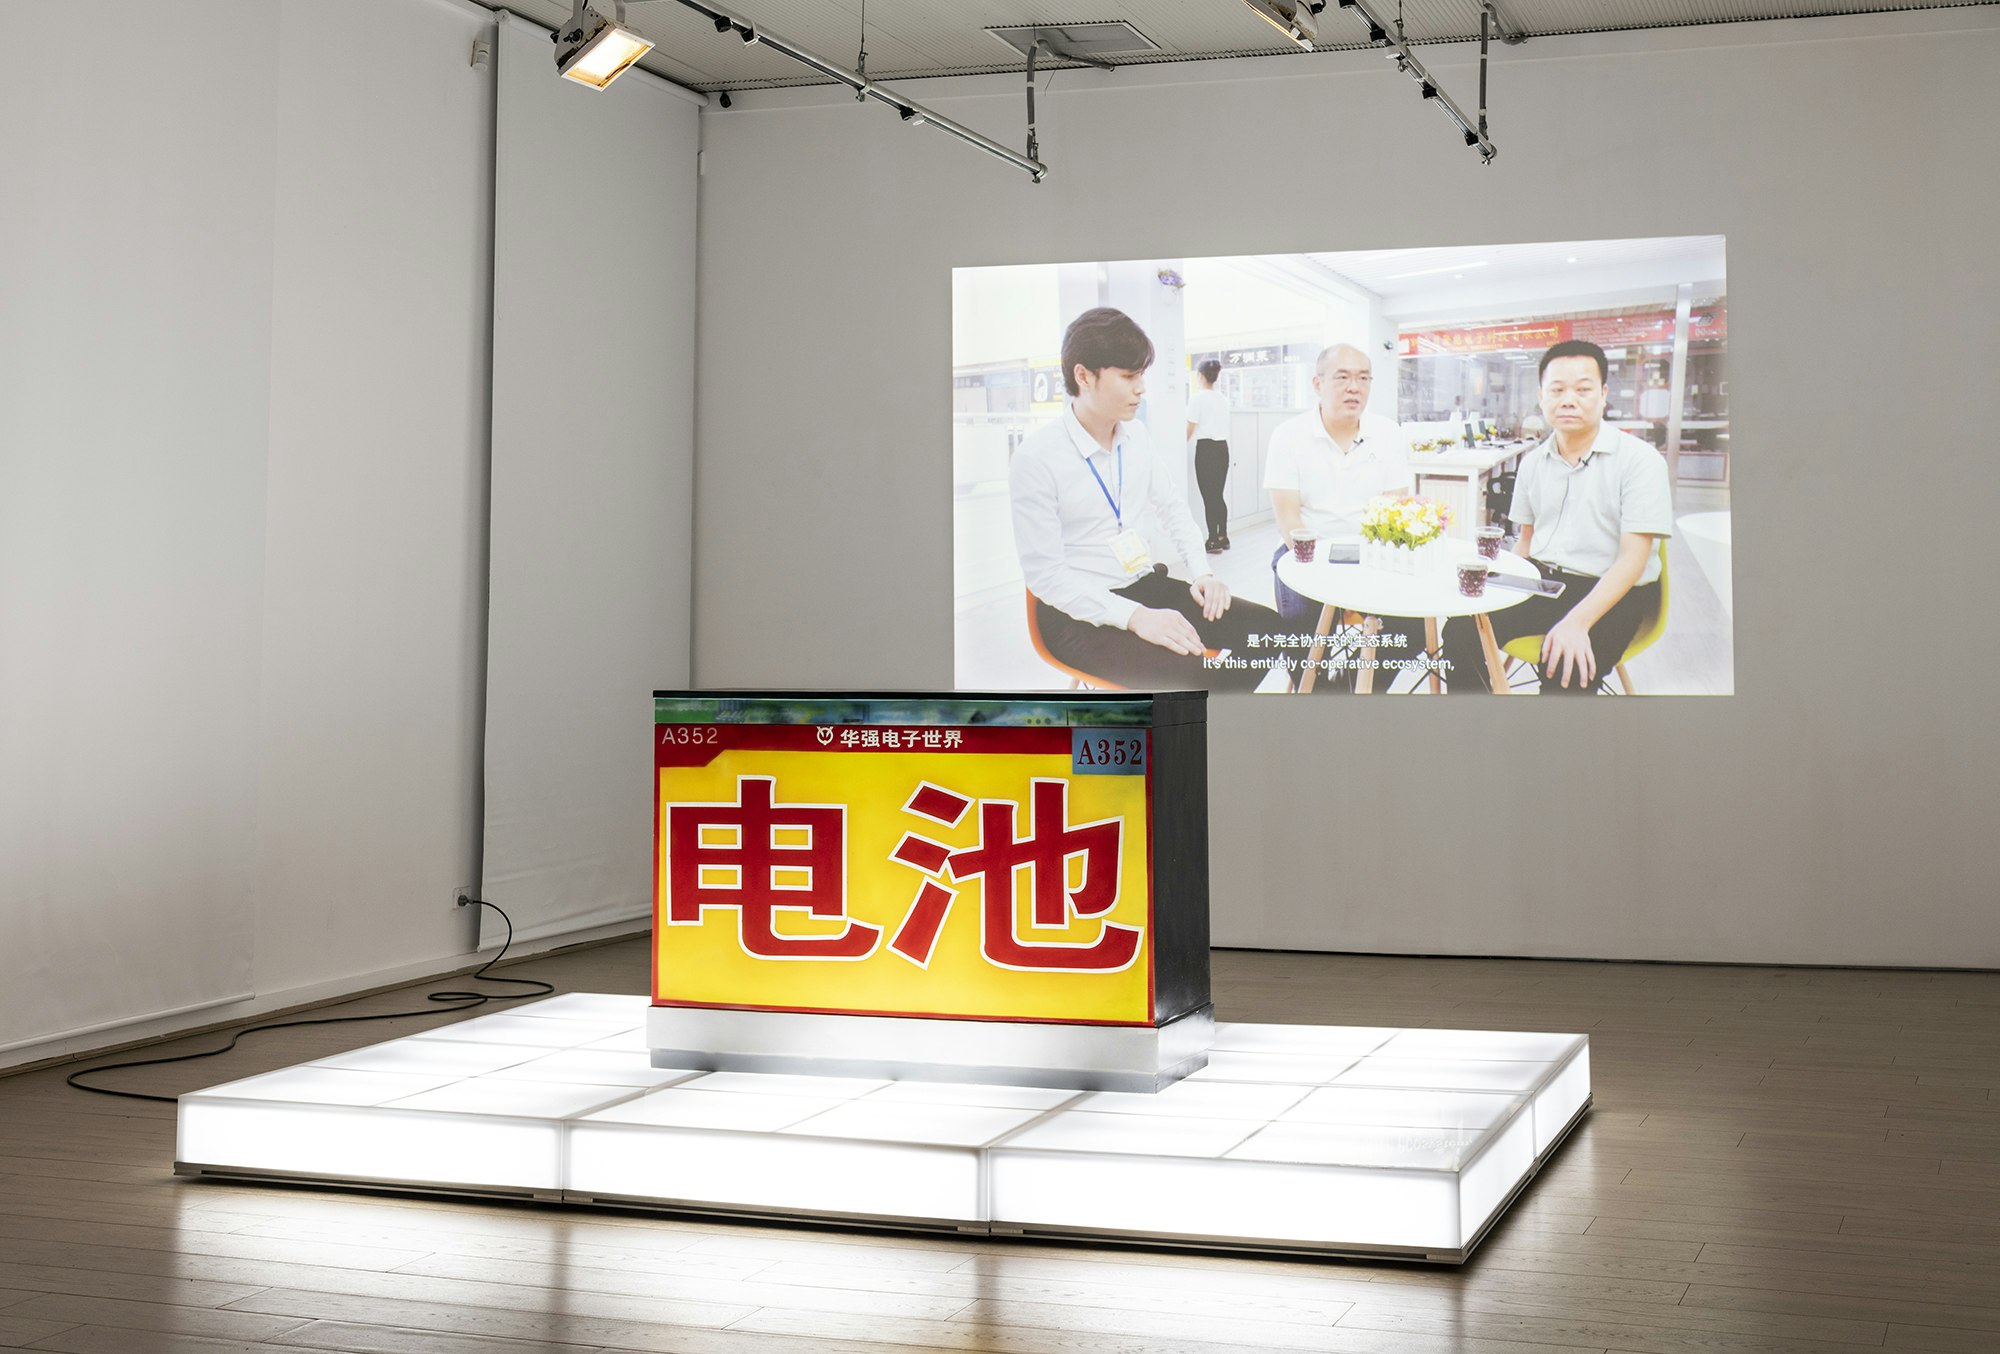 A yellow sculptural block emblazoned with red Chinese characters stands on an illuminated white plinth, with a video still of three seated male-presenting figures projected onto the wall behind